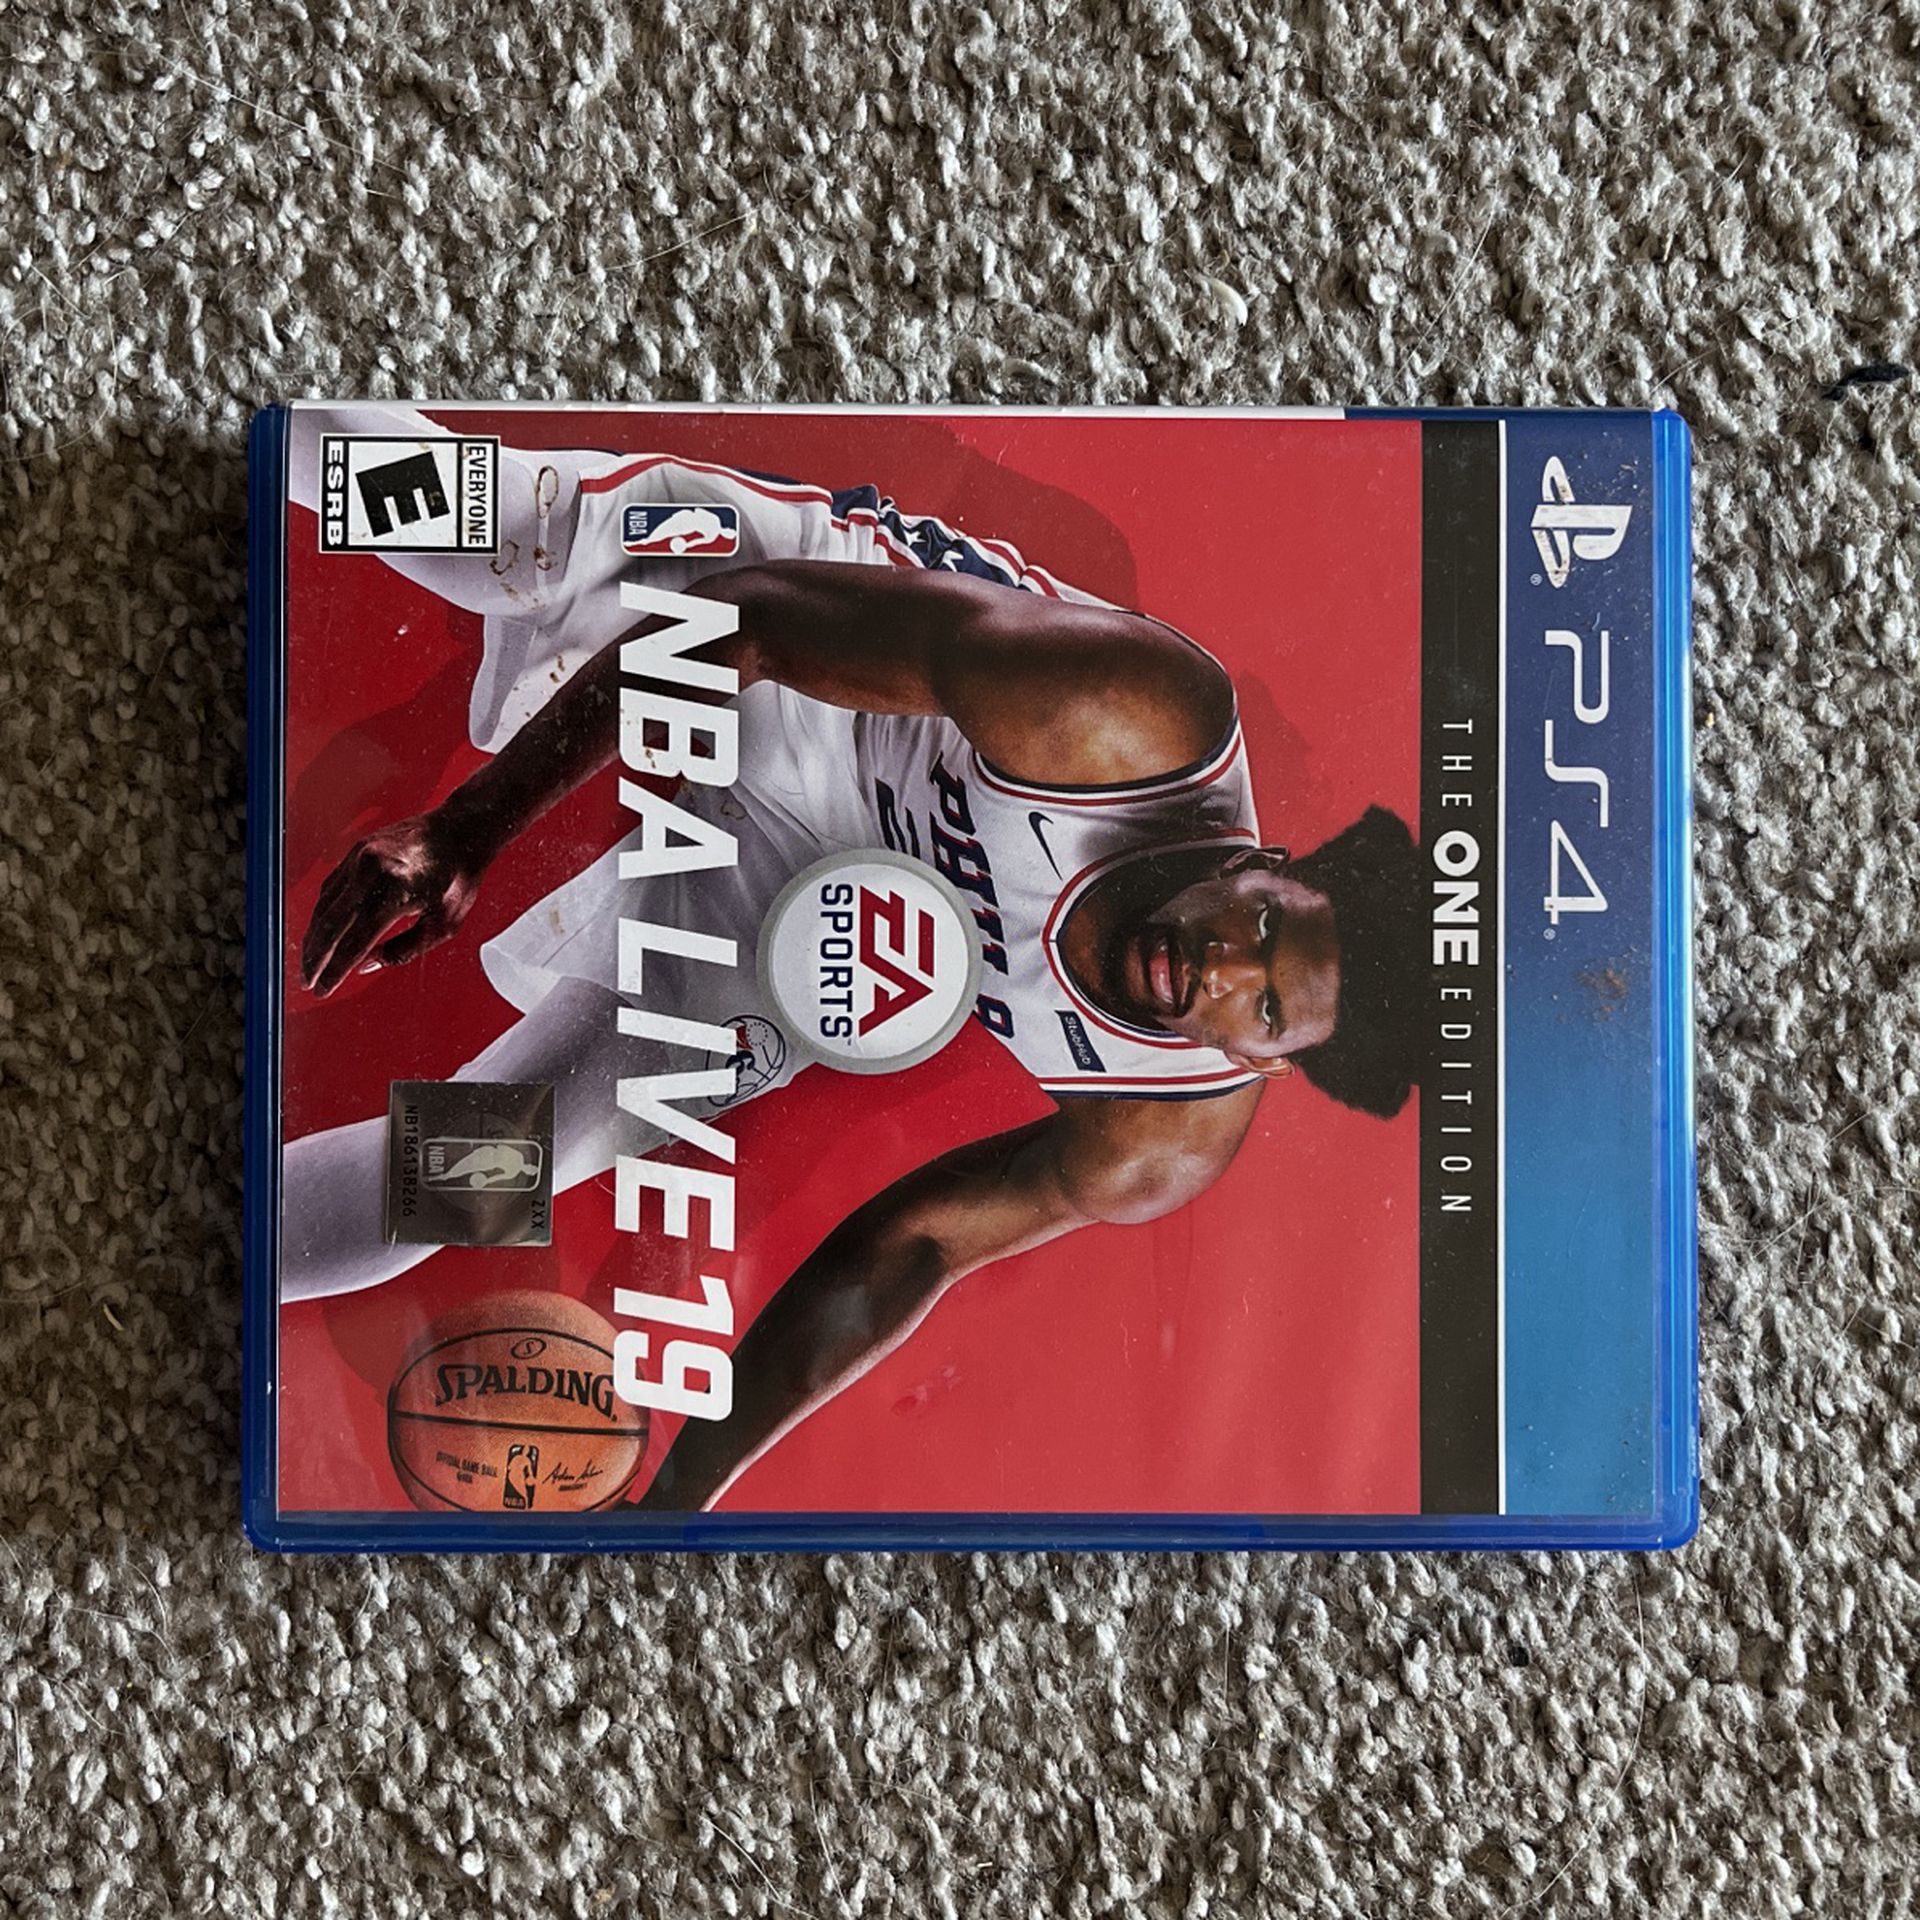 NBA LIVE 19: THE ONE EDITION